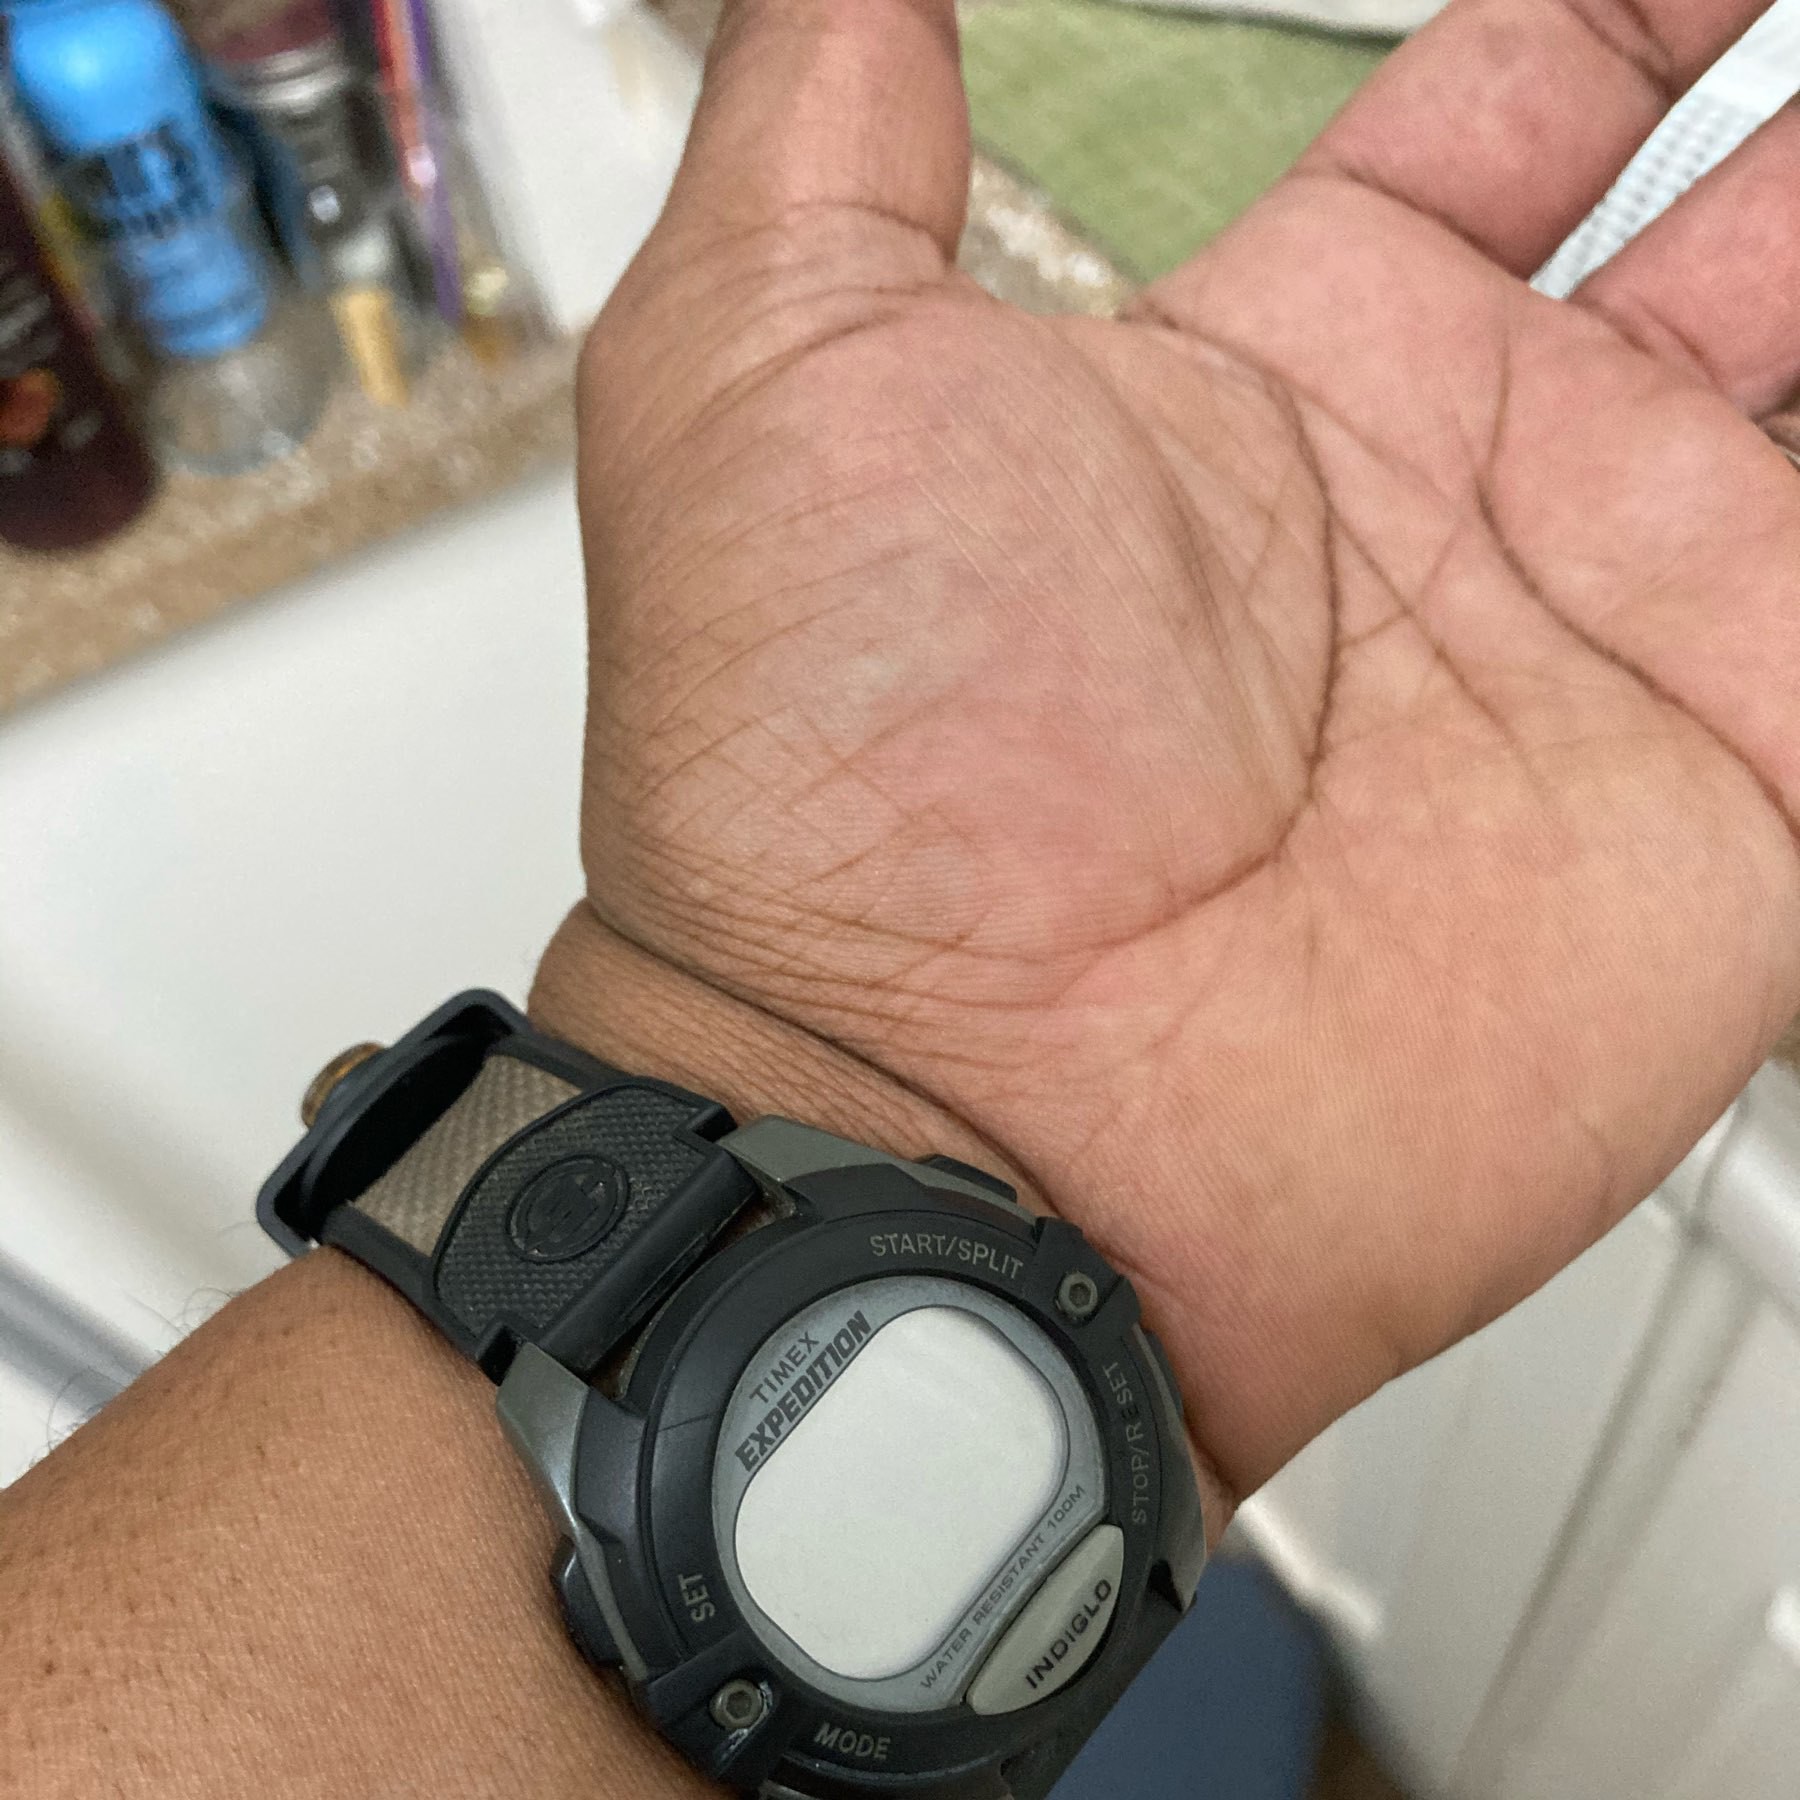 Watch with no display. 